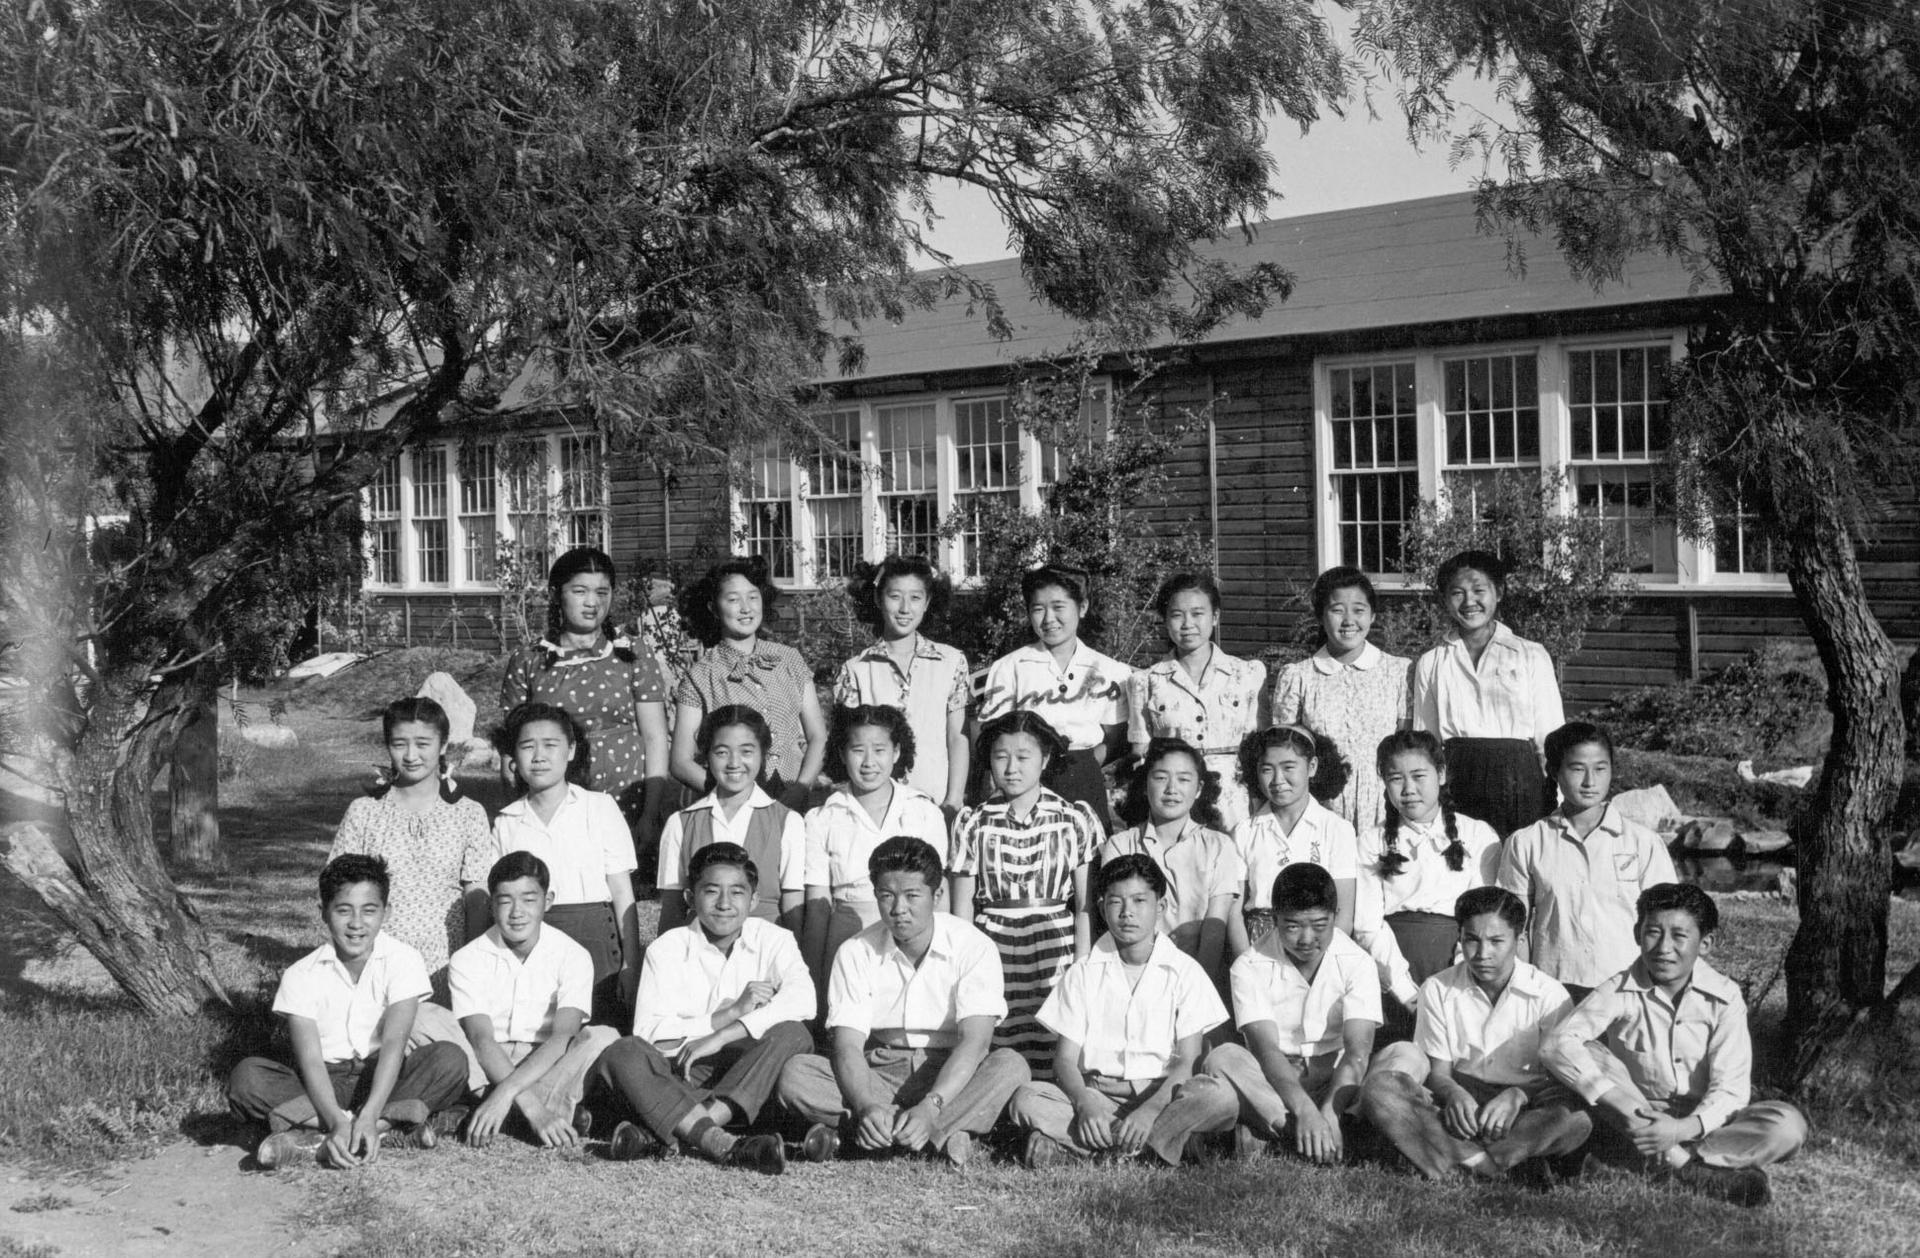 Three rows of students pose in front of a building